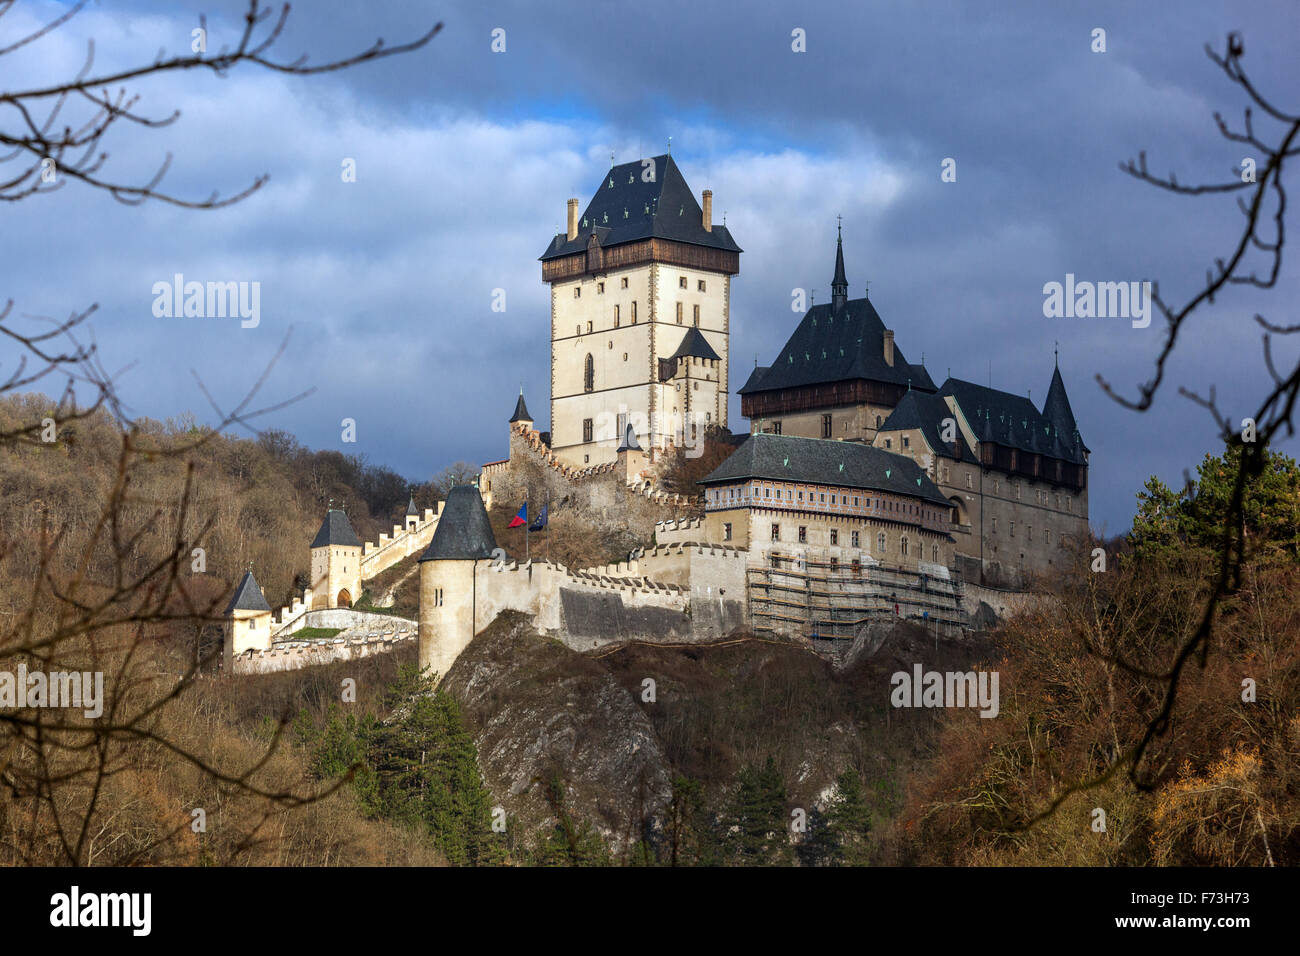 Karlstejn Castle is a large Royal Gothic castle founded 1348 CE by Charles IV, Holy Roman Emperor and King of Bohemia. Stock Photo